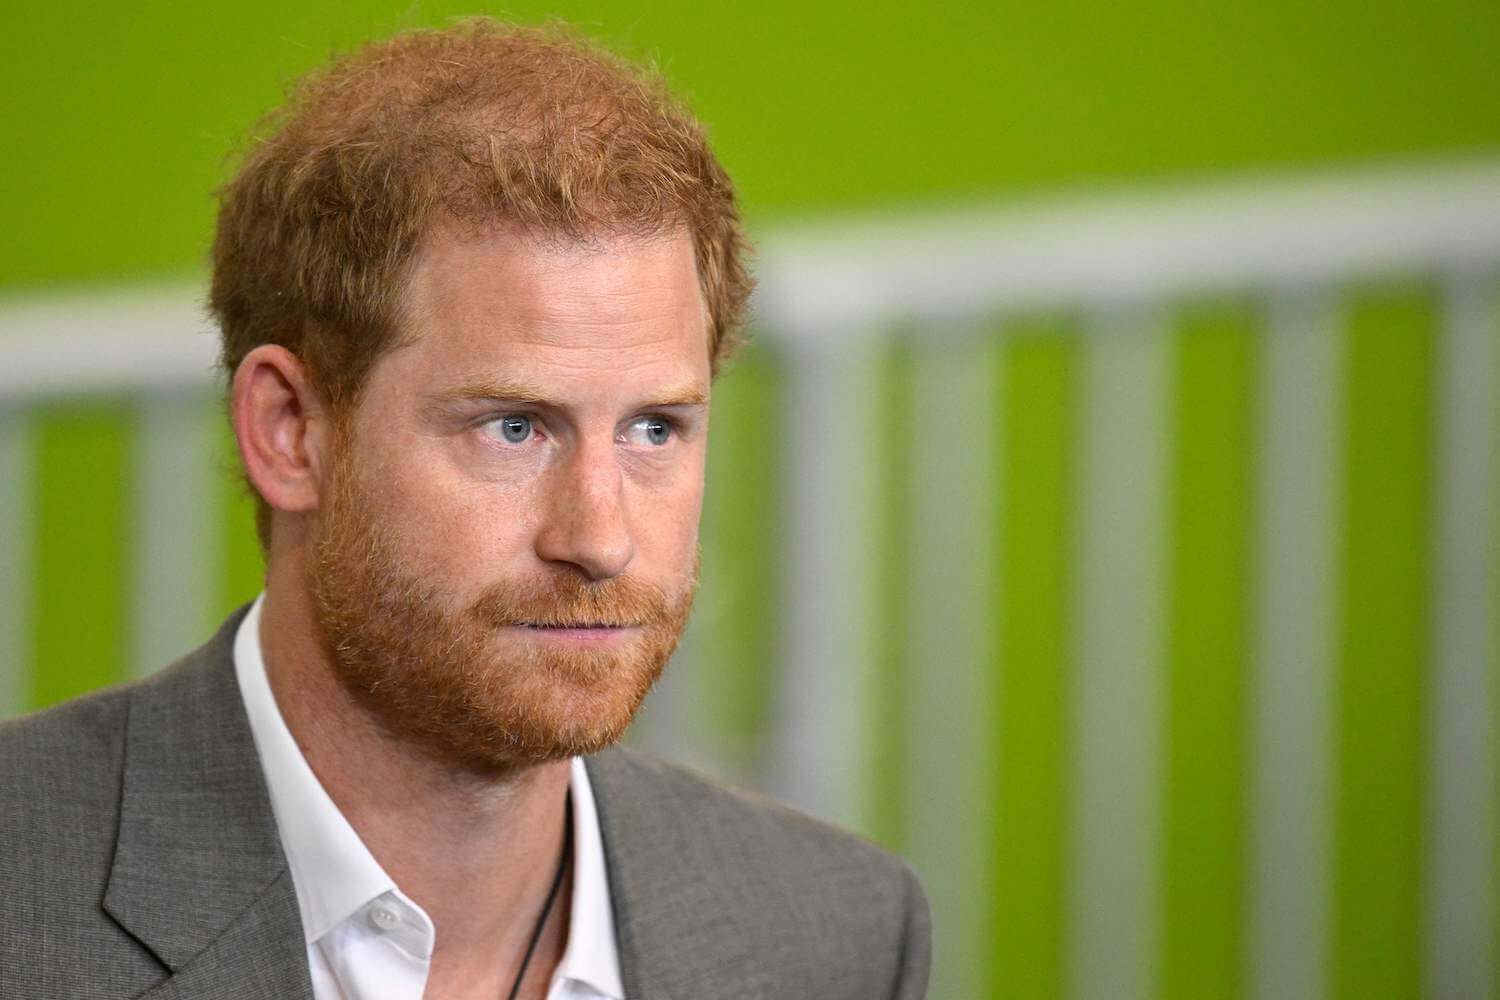 Prince Harry might have turned out differently if Princess Diana made a decision about his education